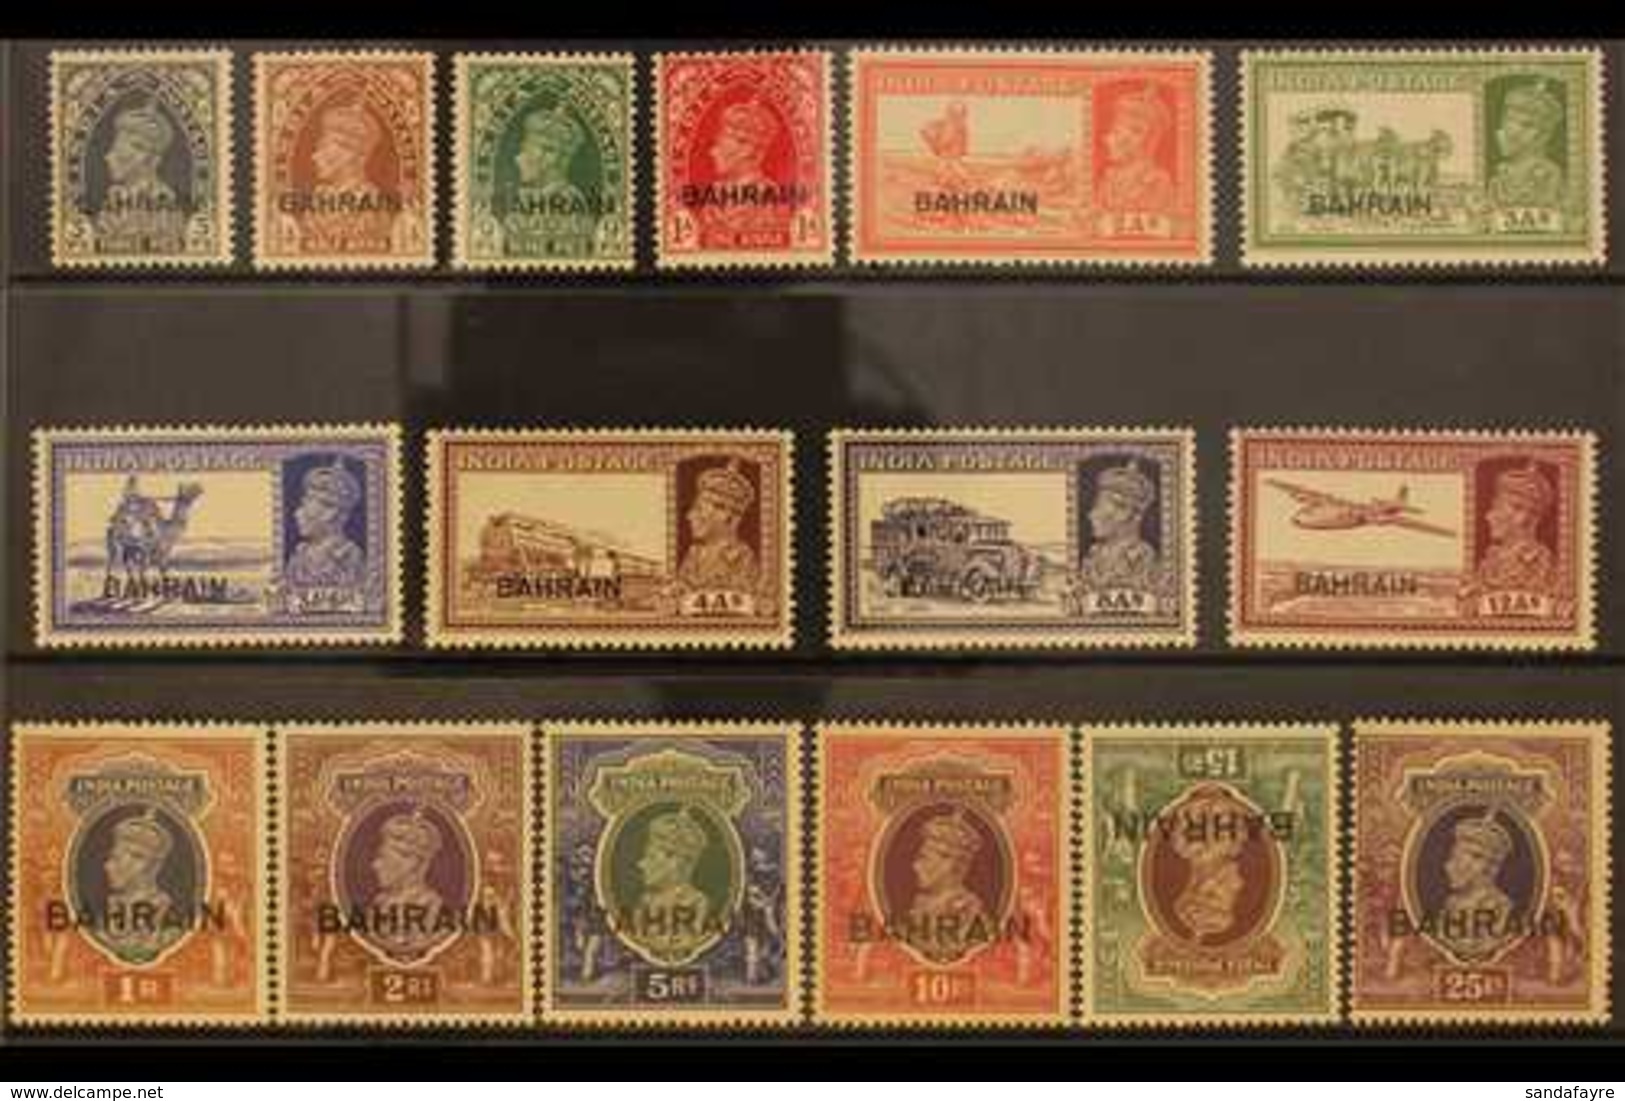 1938-41  KGVI India Stamps Opt'd "BAHRAIN" Complete Set, SG 20/37, 5r, 10r & 25r Are Never Hinged & Lightly Tropicalized - Bahrein (...-1965)